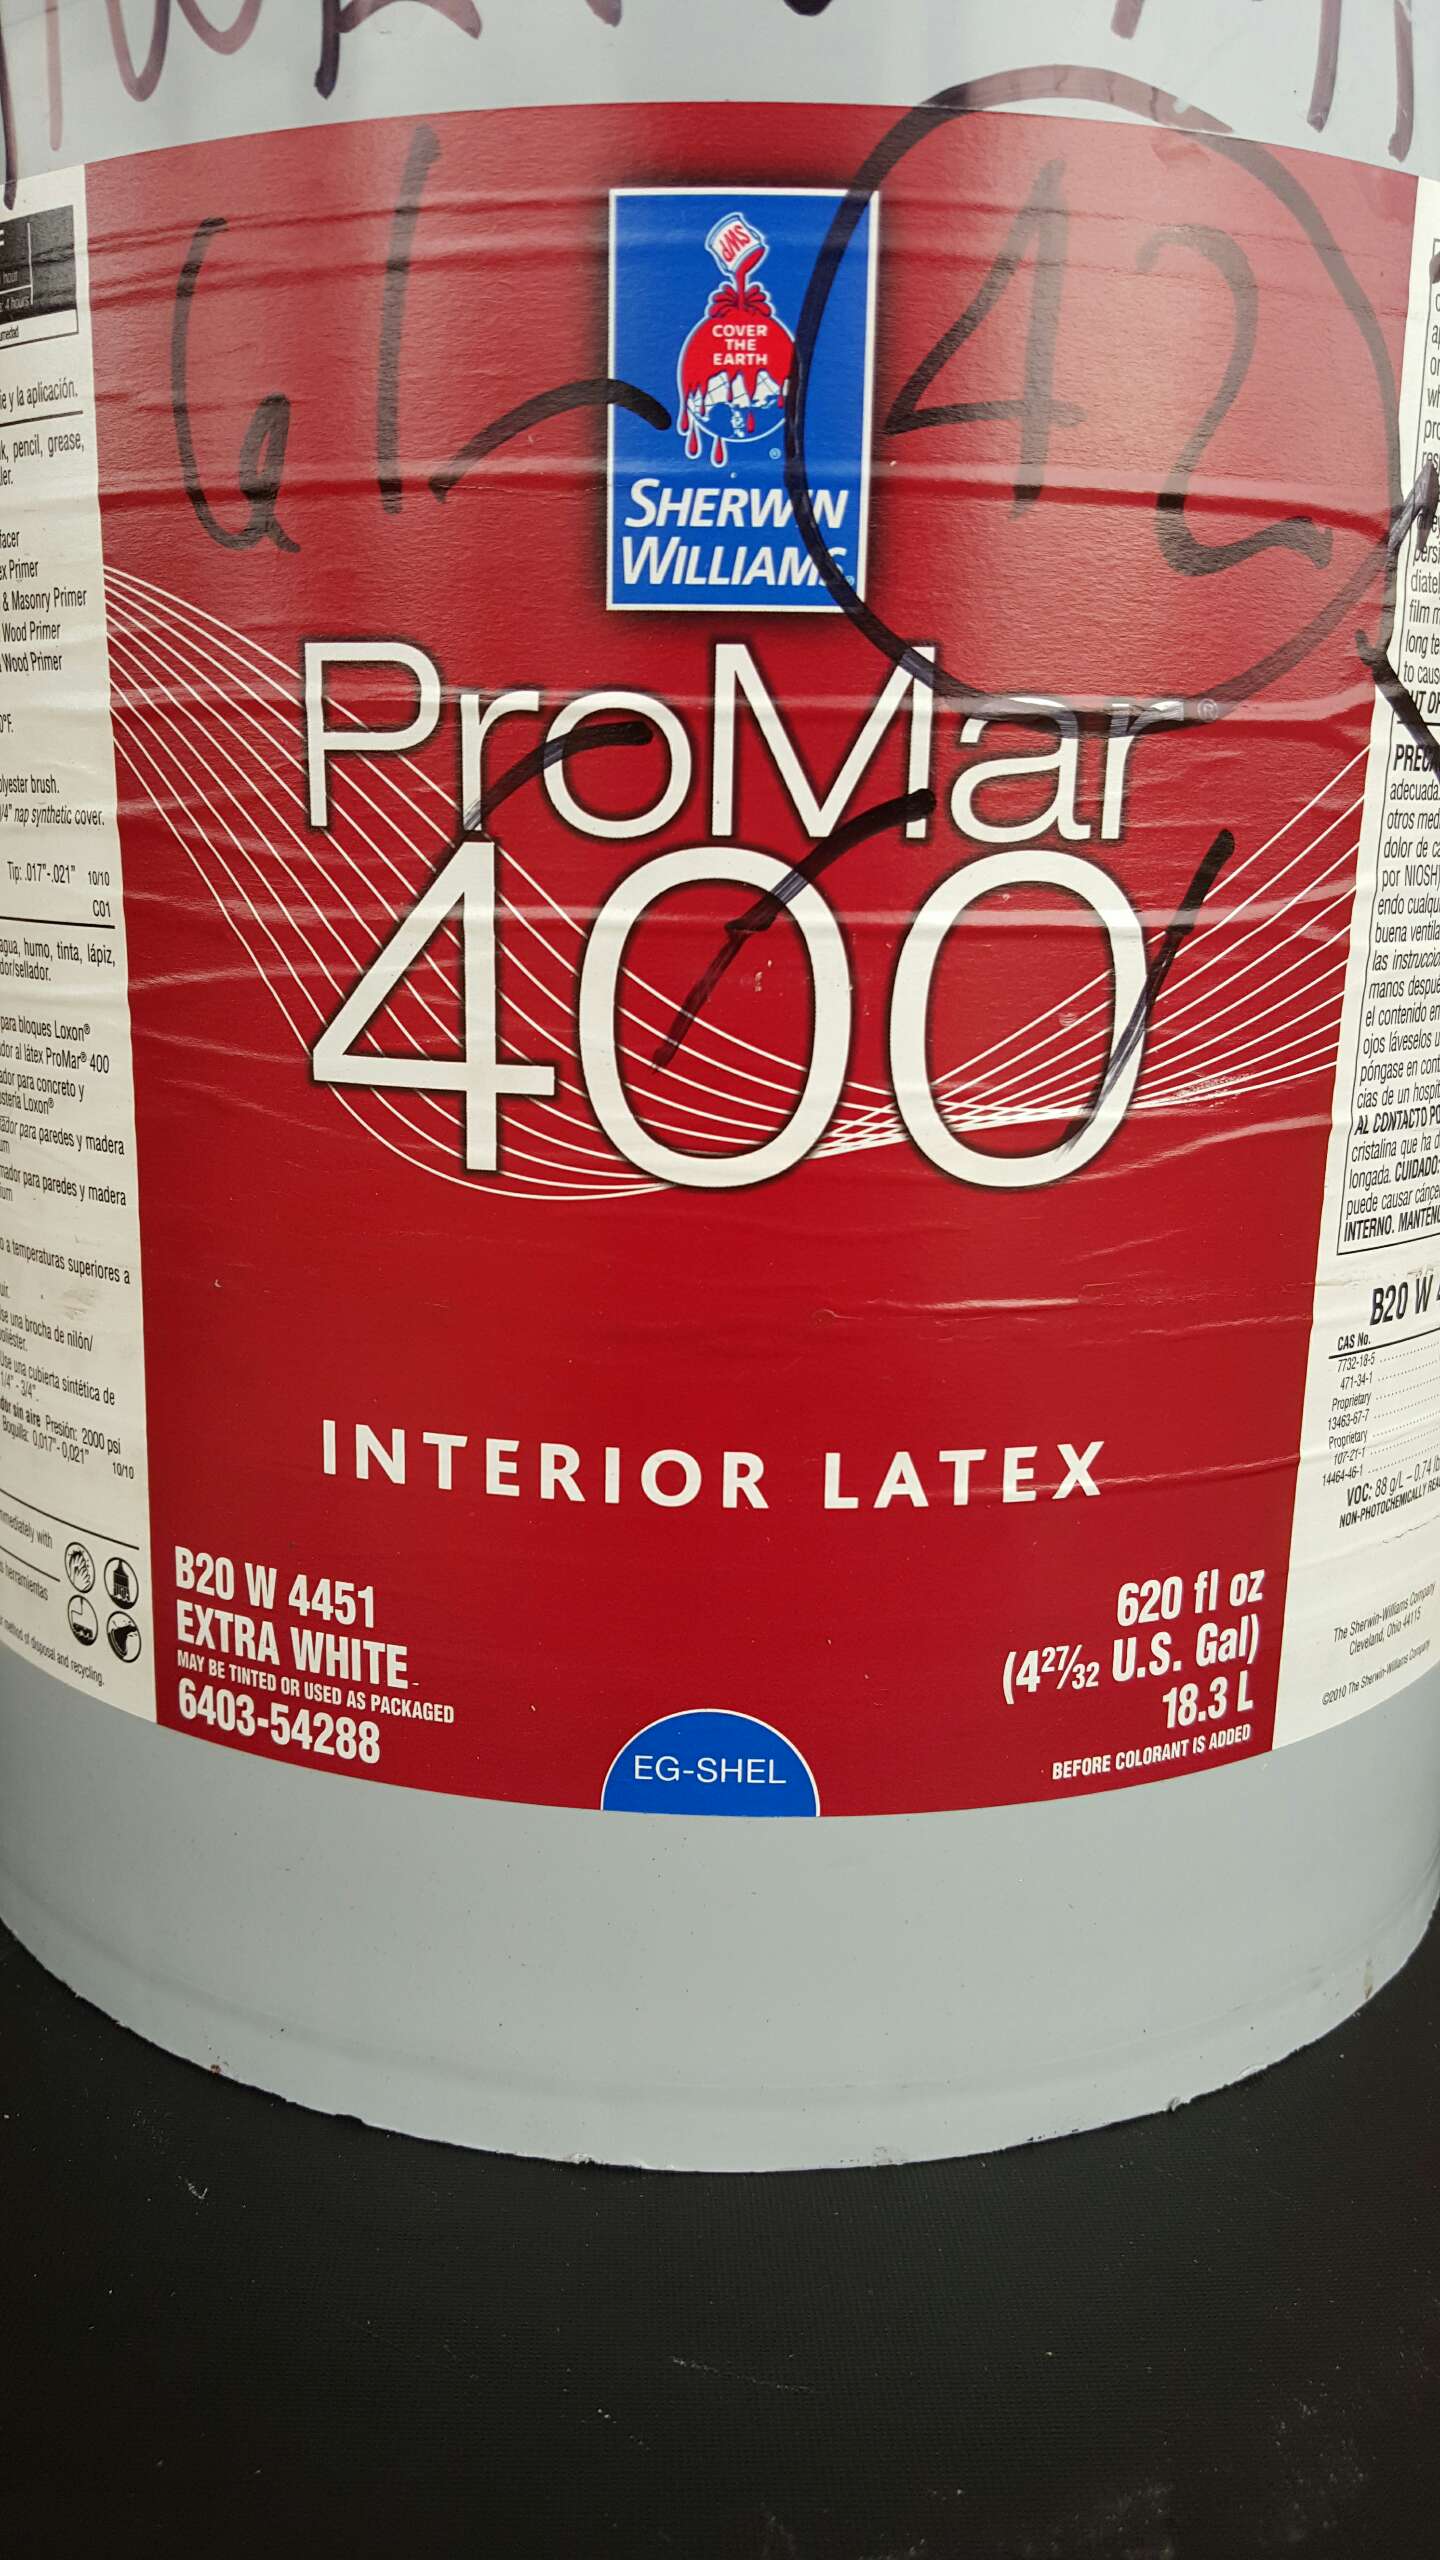 Sherwin Williams ProMar 400 Paint (4.5 Gallon) for sale in